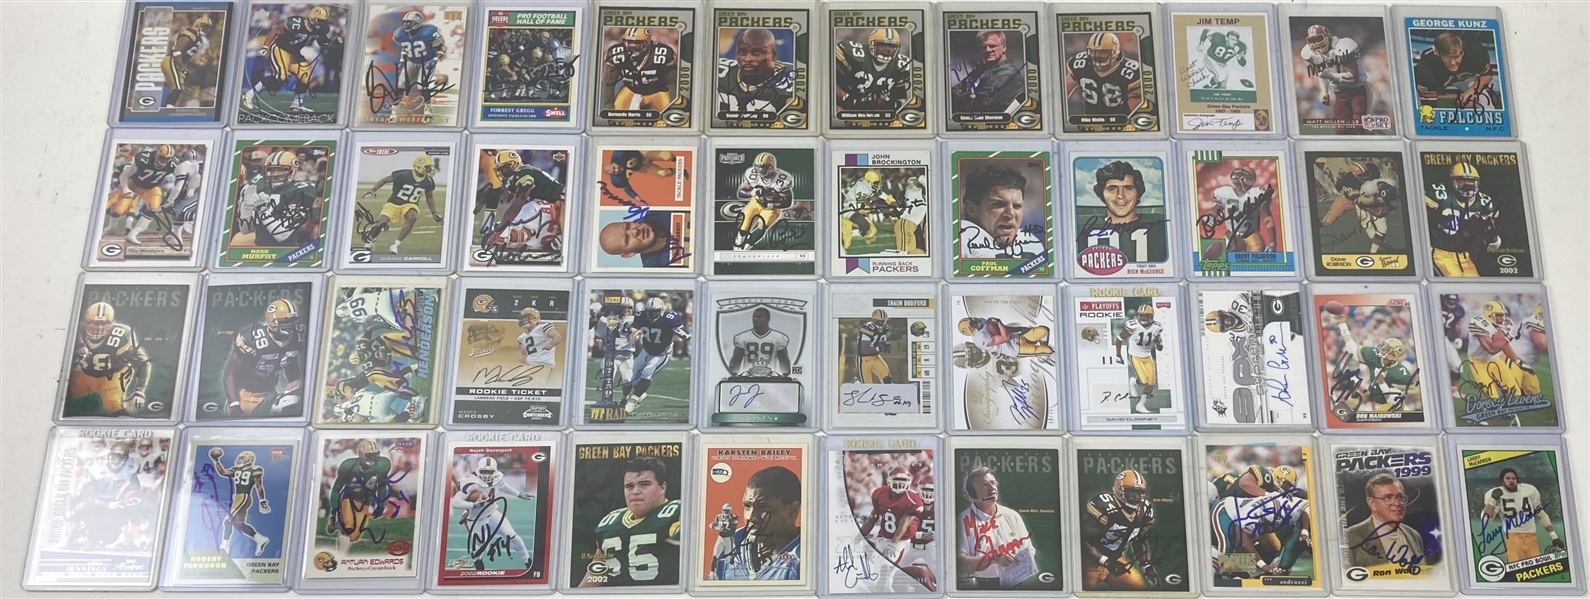 1970s-2010s Green Bay Packers Signed Football Trading Cards - Lot of 125+ w/ Ron Wolf, Don Majkowski, James Lofton, Donald Driver & More